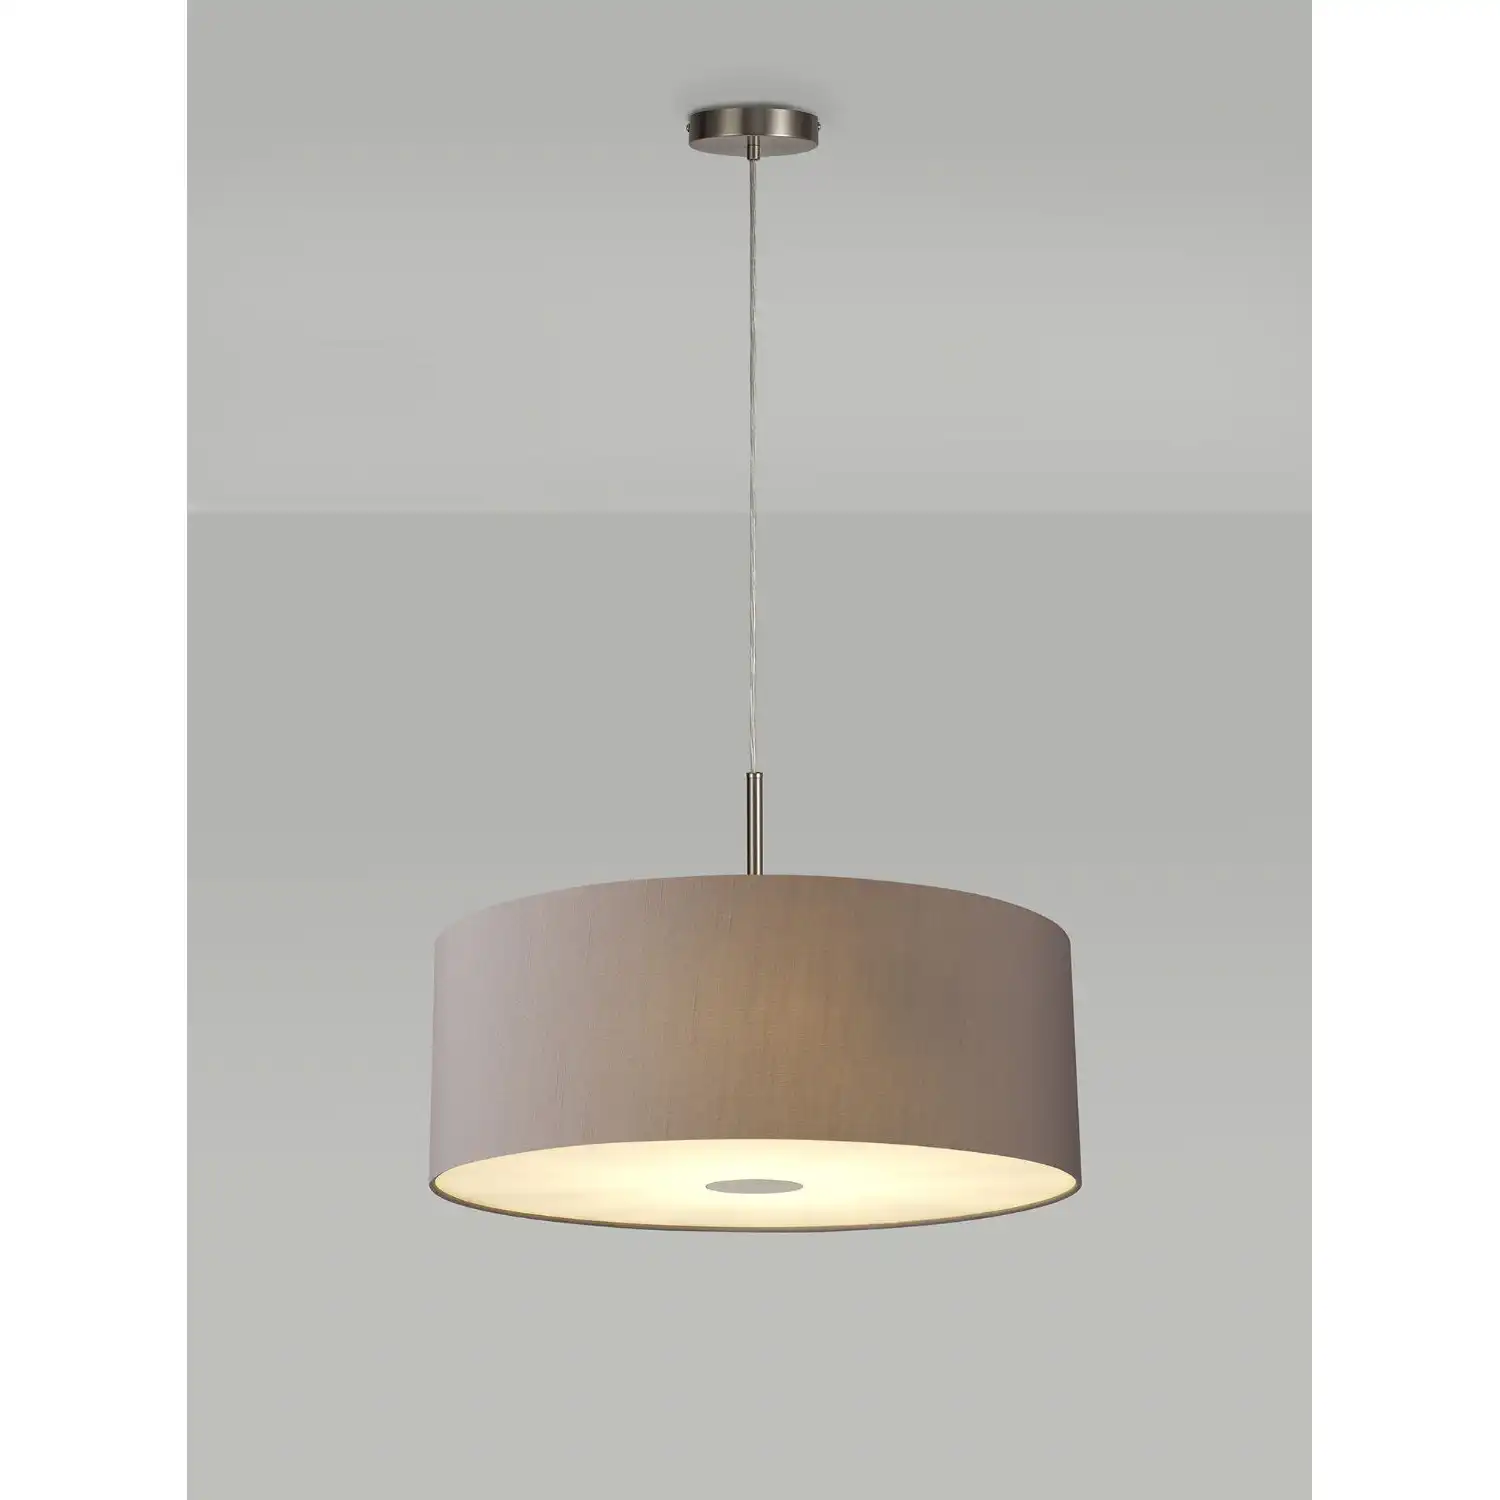 Baymont Satin Nickel 3m 5 Light E27 Single Pendant c w 600 x 220mm Faux Silk Fabric Shade, Grey White Laminate And 600mm Frosted PC Acrylic Diffuser